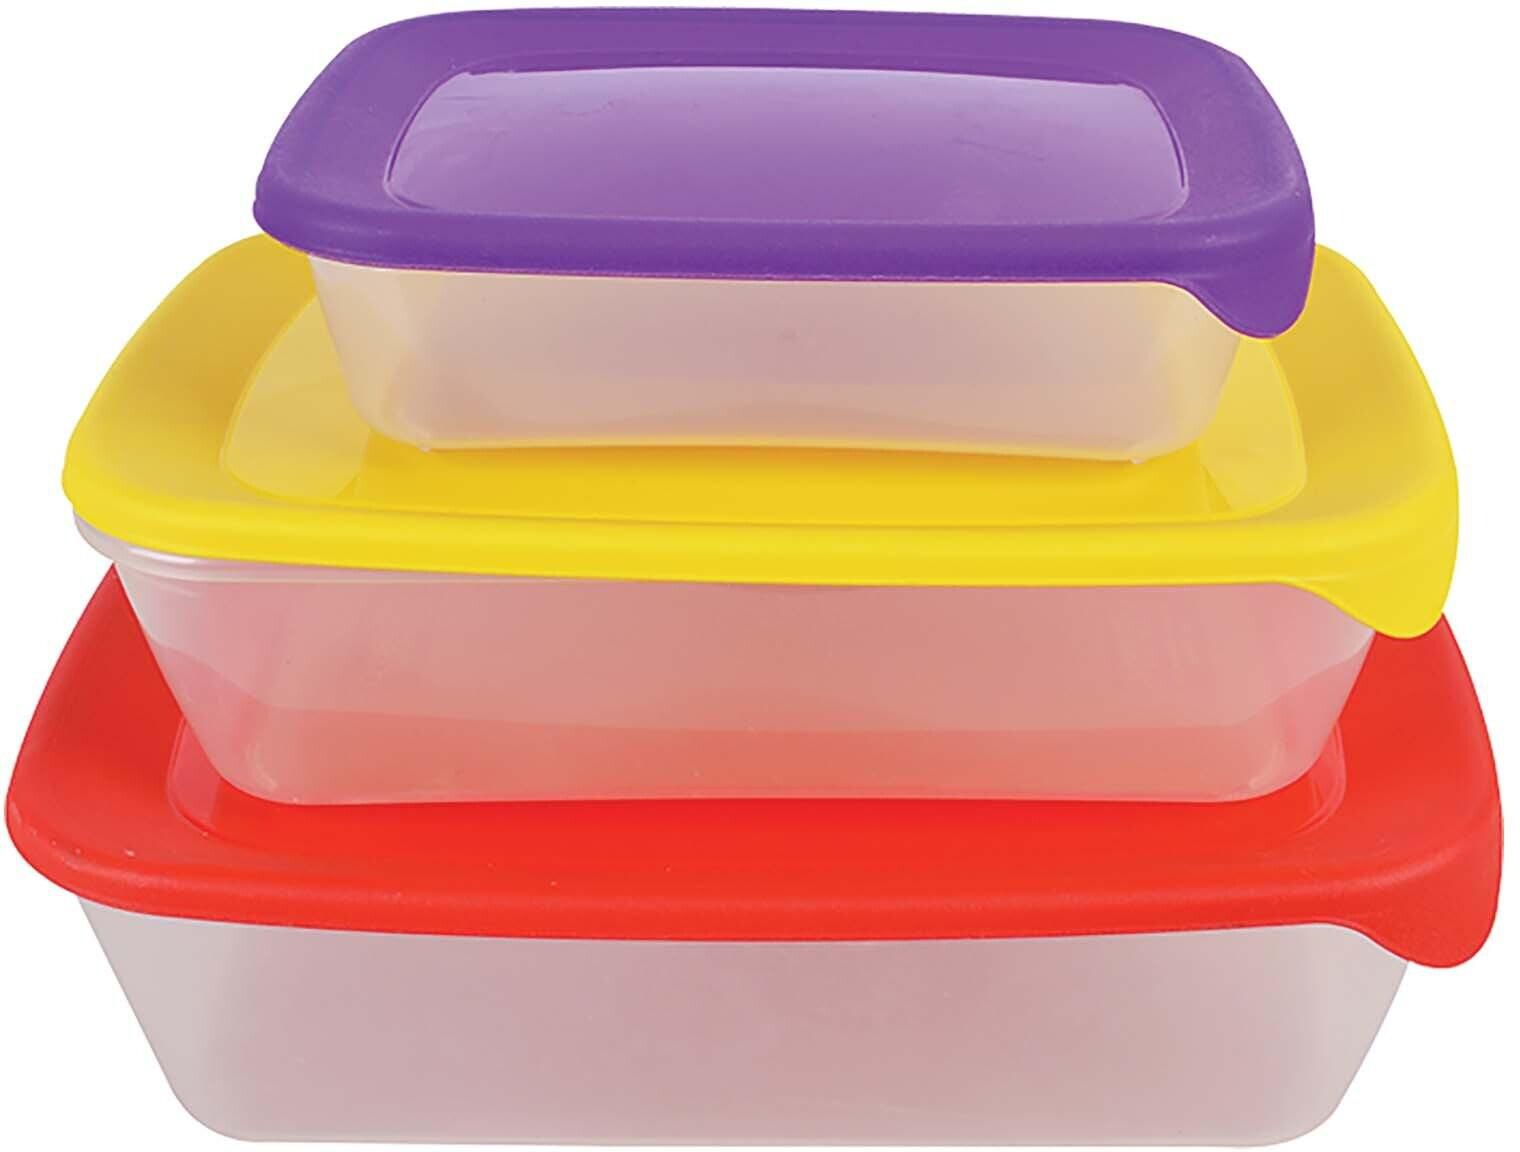 My Choice Rectangle Food Container Set - 3 Piece